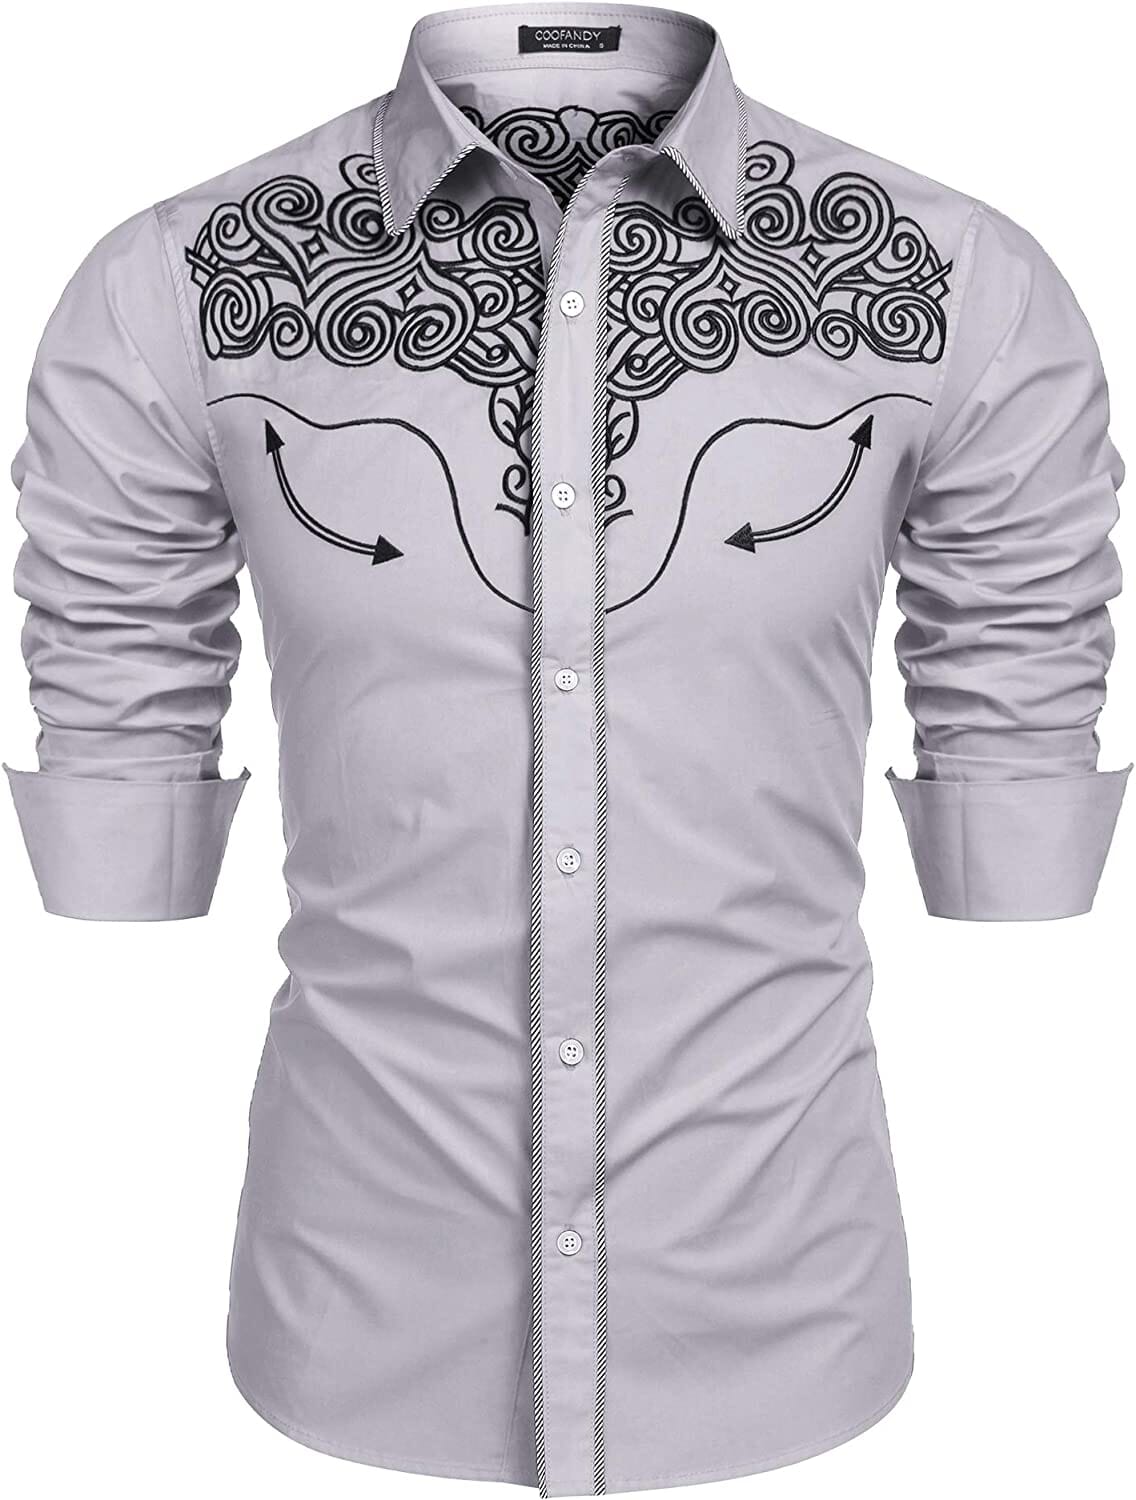 Embroidered Cowboy Button Down Shirt (US Only) Shirts COOFANDY Store Gray S 